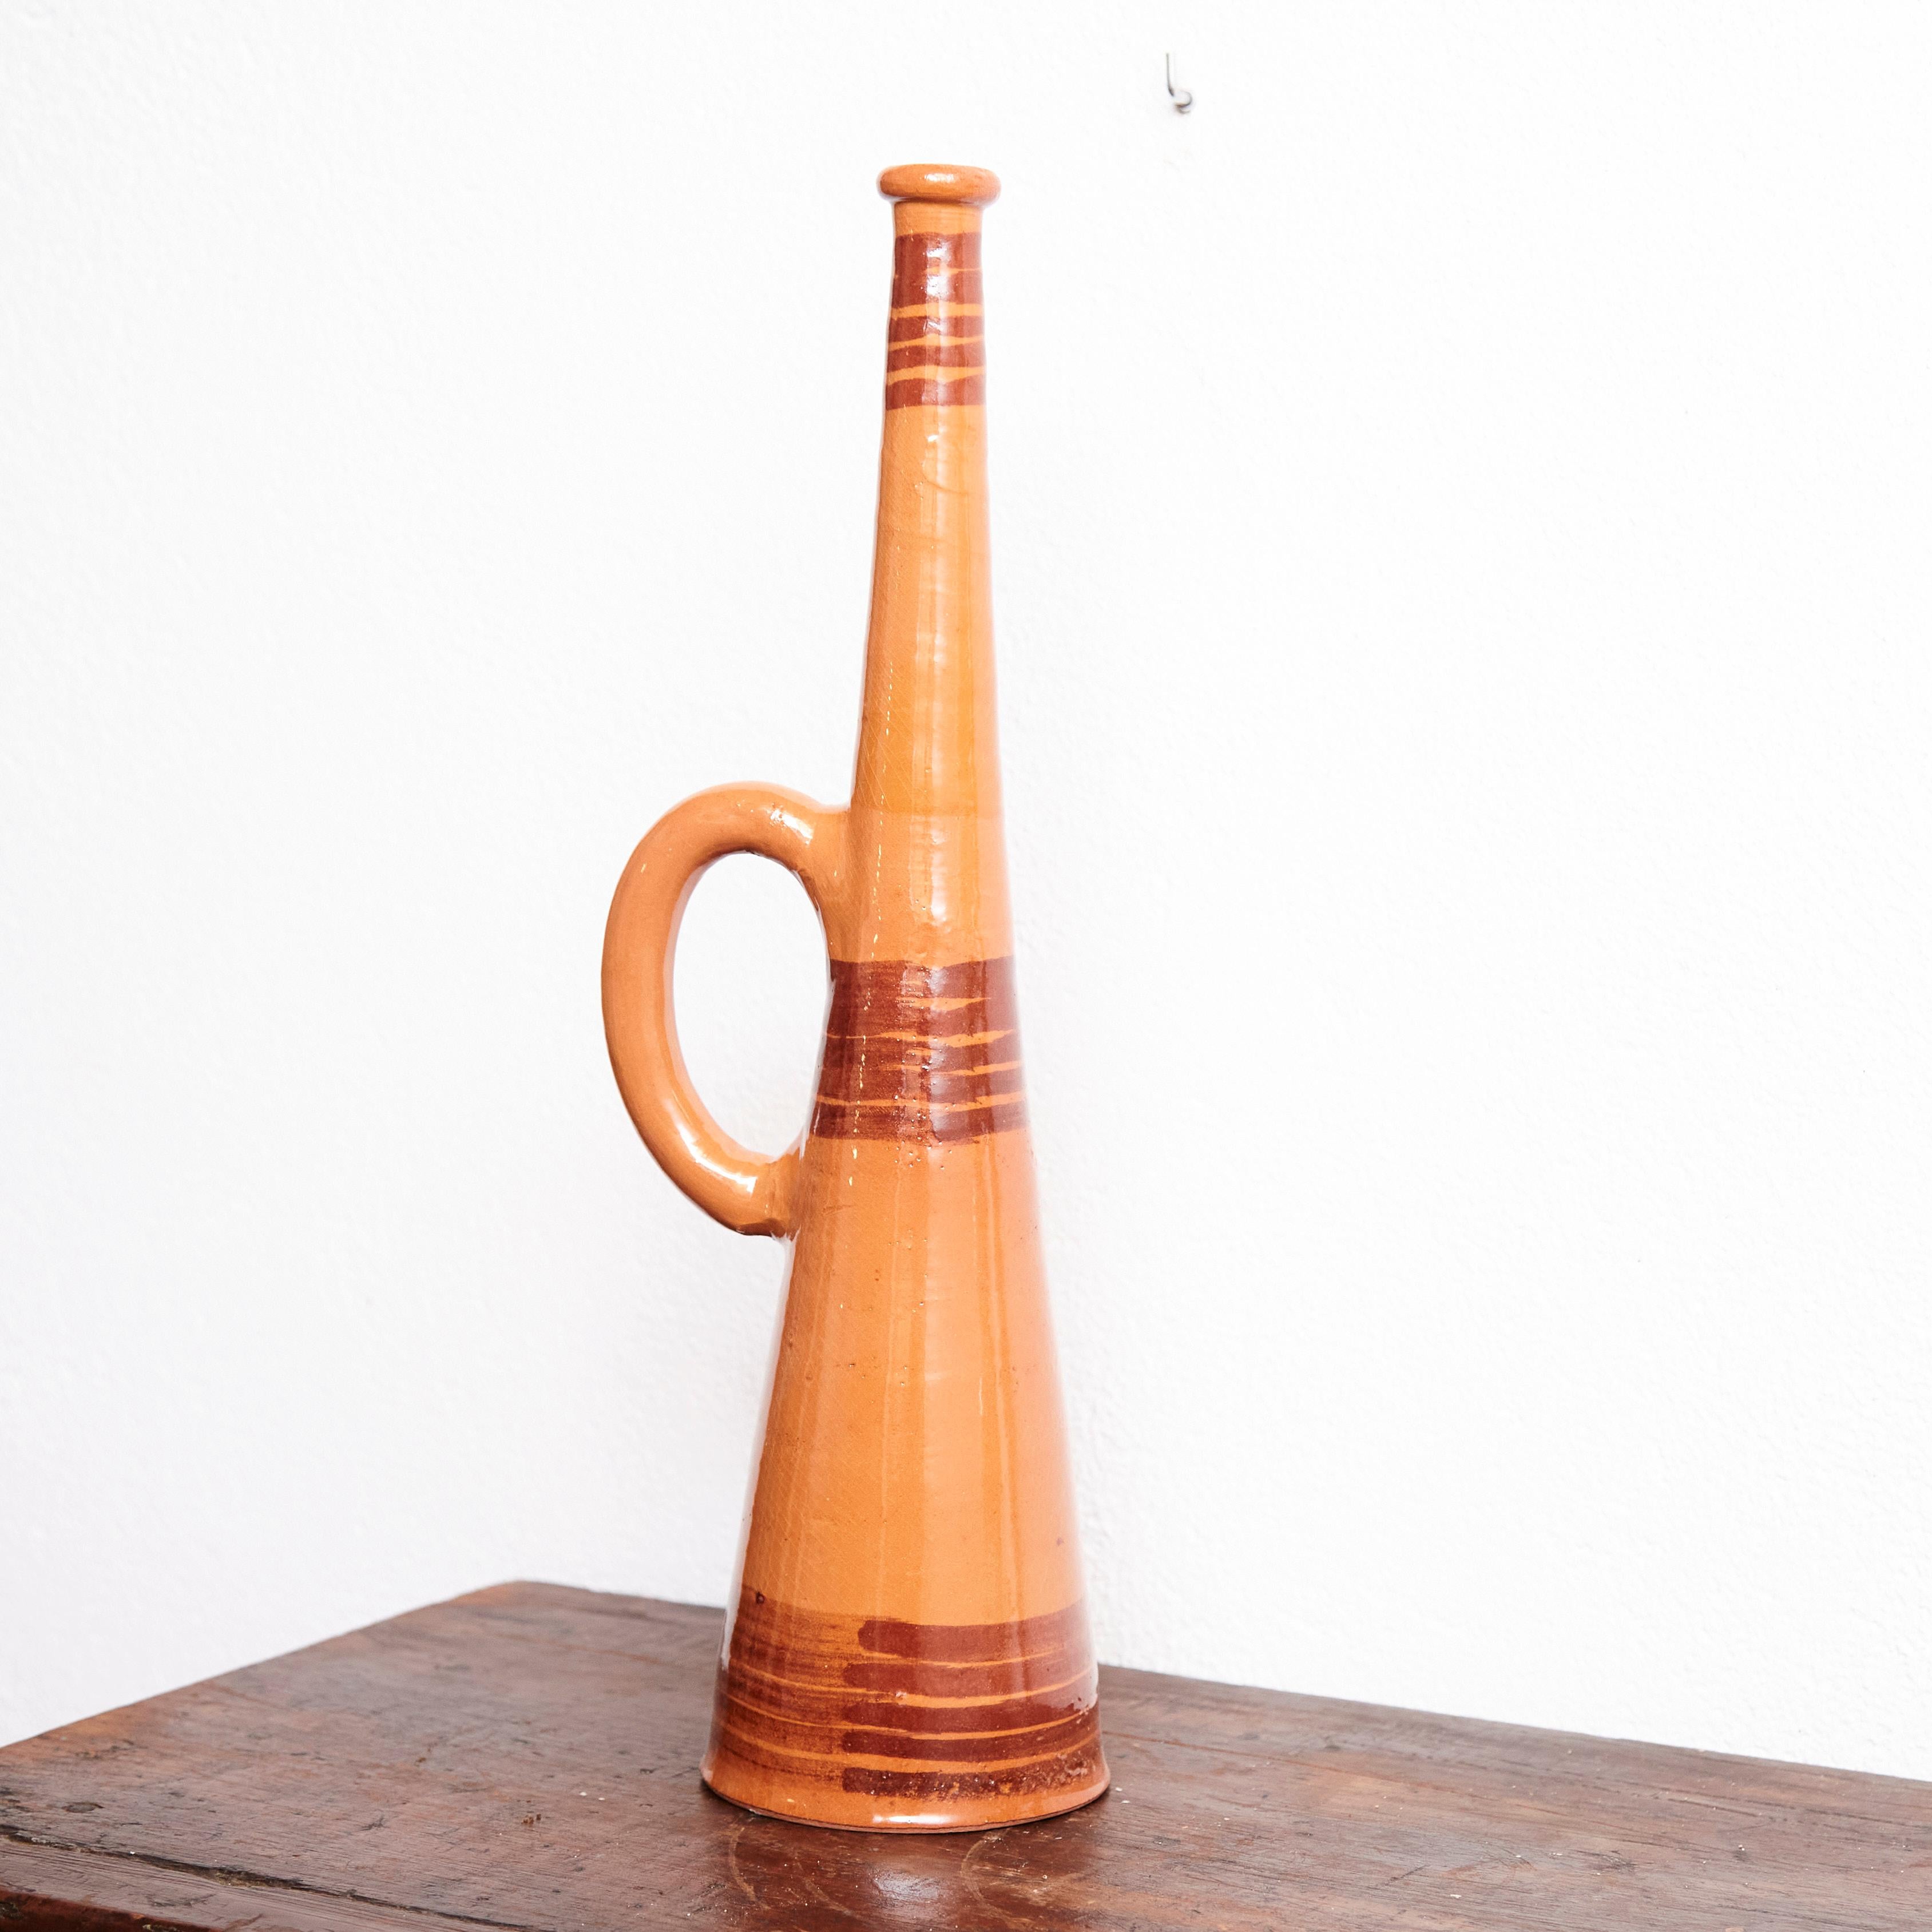 Traditional Spanish rustic ceramic trumpet.

Manufactured in Spain by unknown manufacturer, circa 1960.

In original condition, with minor wear consistent of age and use, preserving a beautiul patina.

Material:
Ceramic.